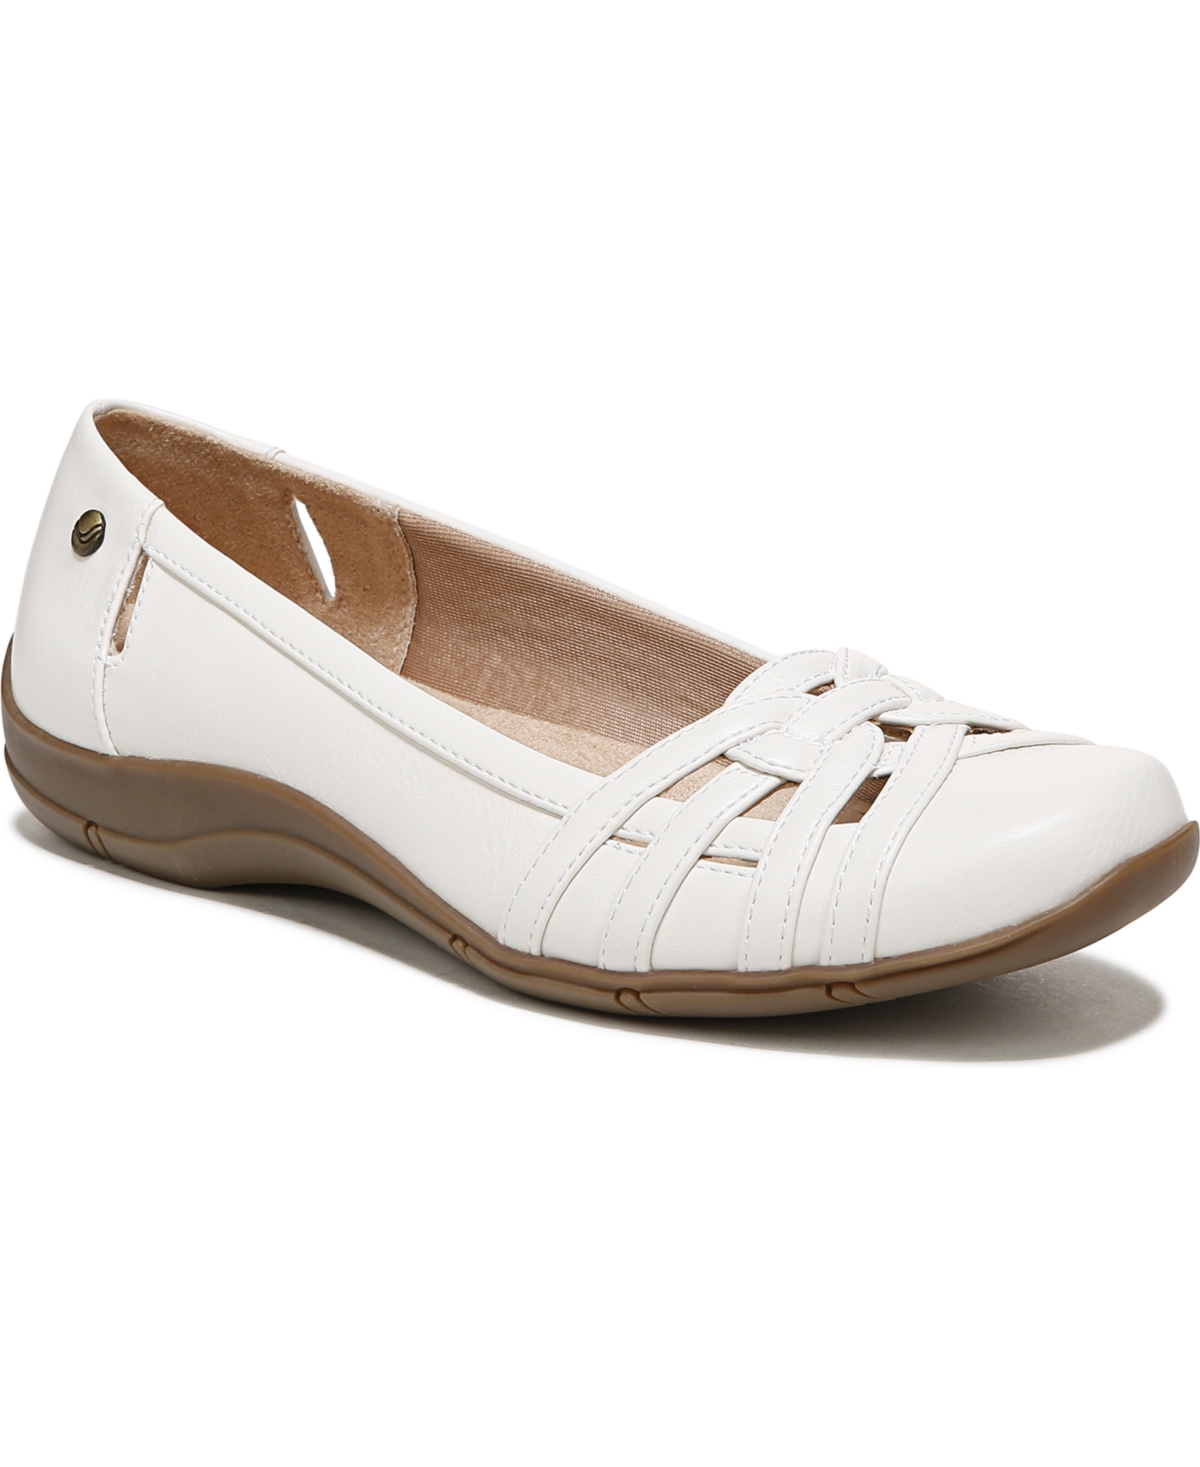 Diverse Flats - White Sand Faux Leather